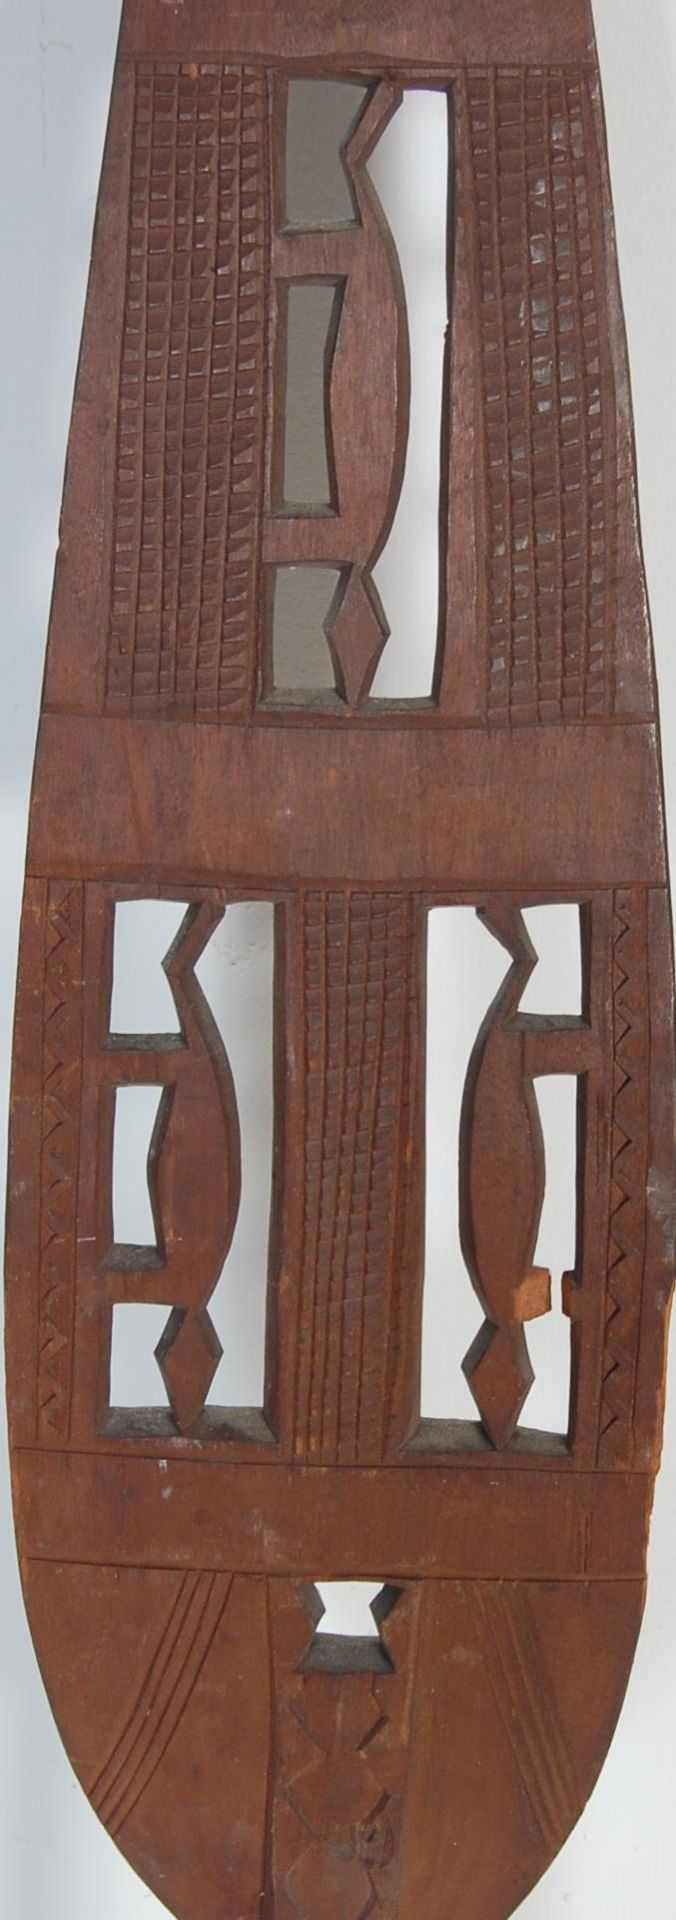 THREE 20TH CENTURY AFRICAN TRIBAL CEREMONIAL PADDLES - Image 11 of 25